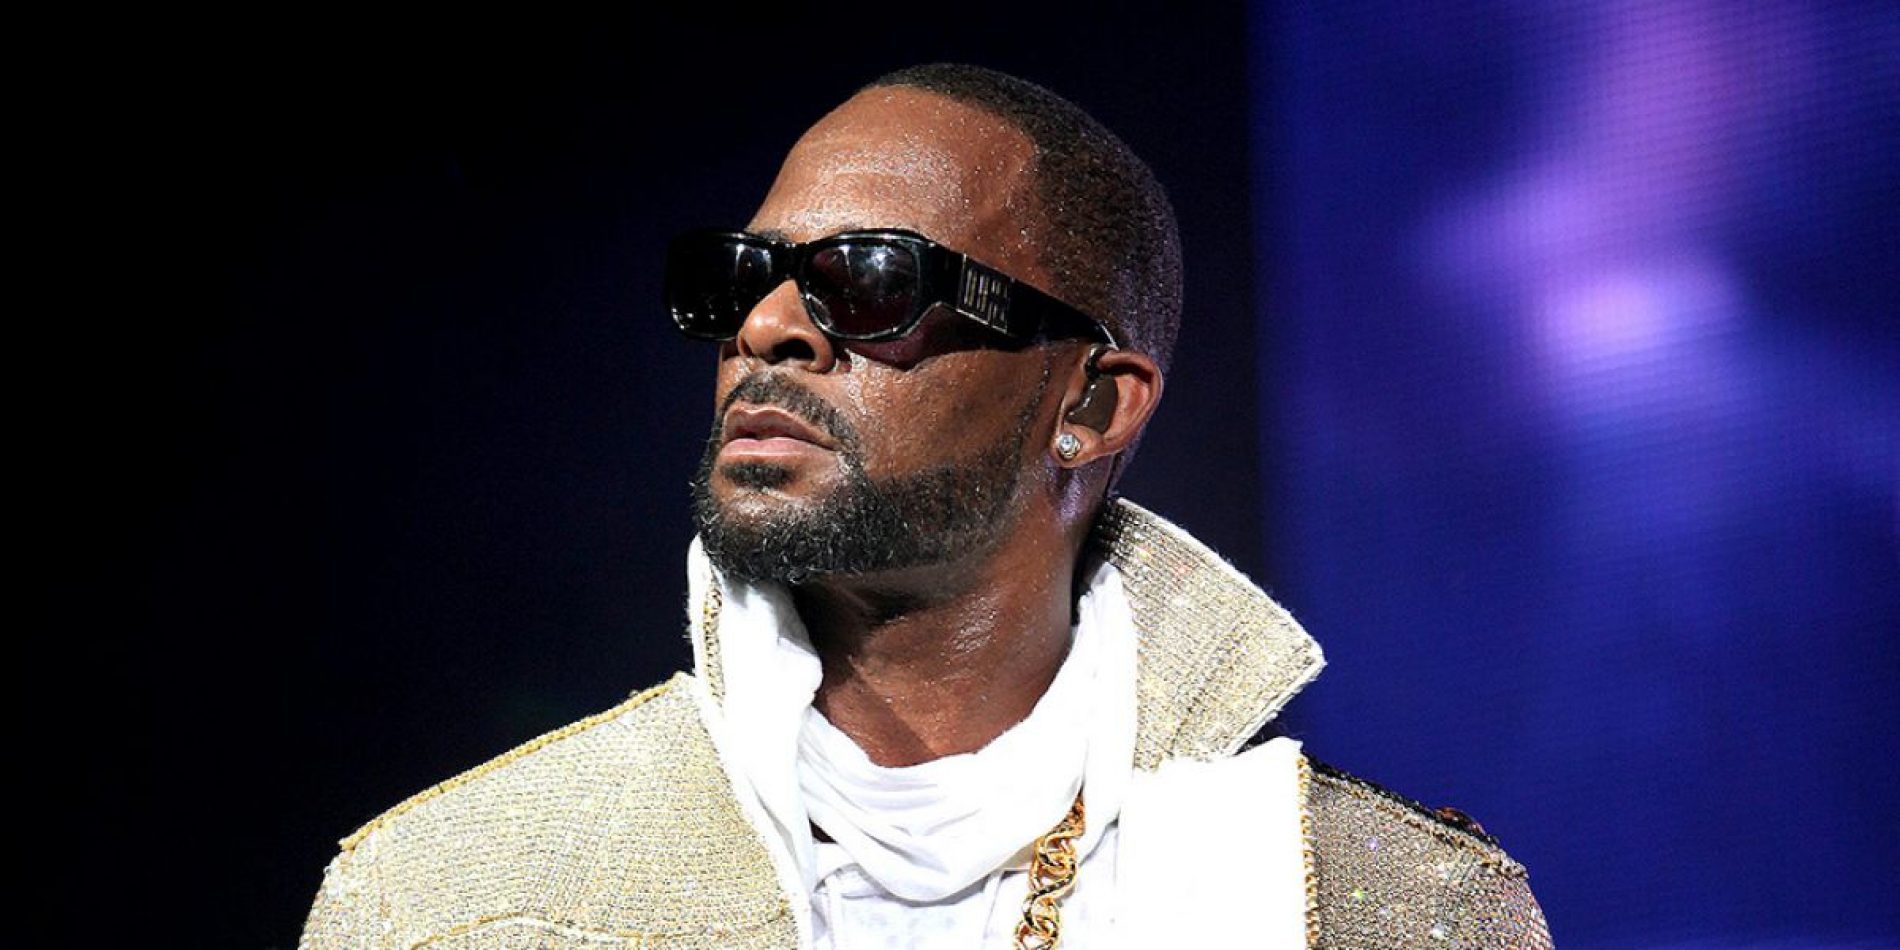 Facebook Reportedly Shuts Down R. Kelly Fan Page ‘Surviving Lies’ For Shaming And ‘Bullying’ Accusers